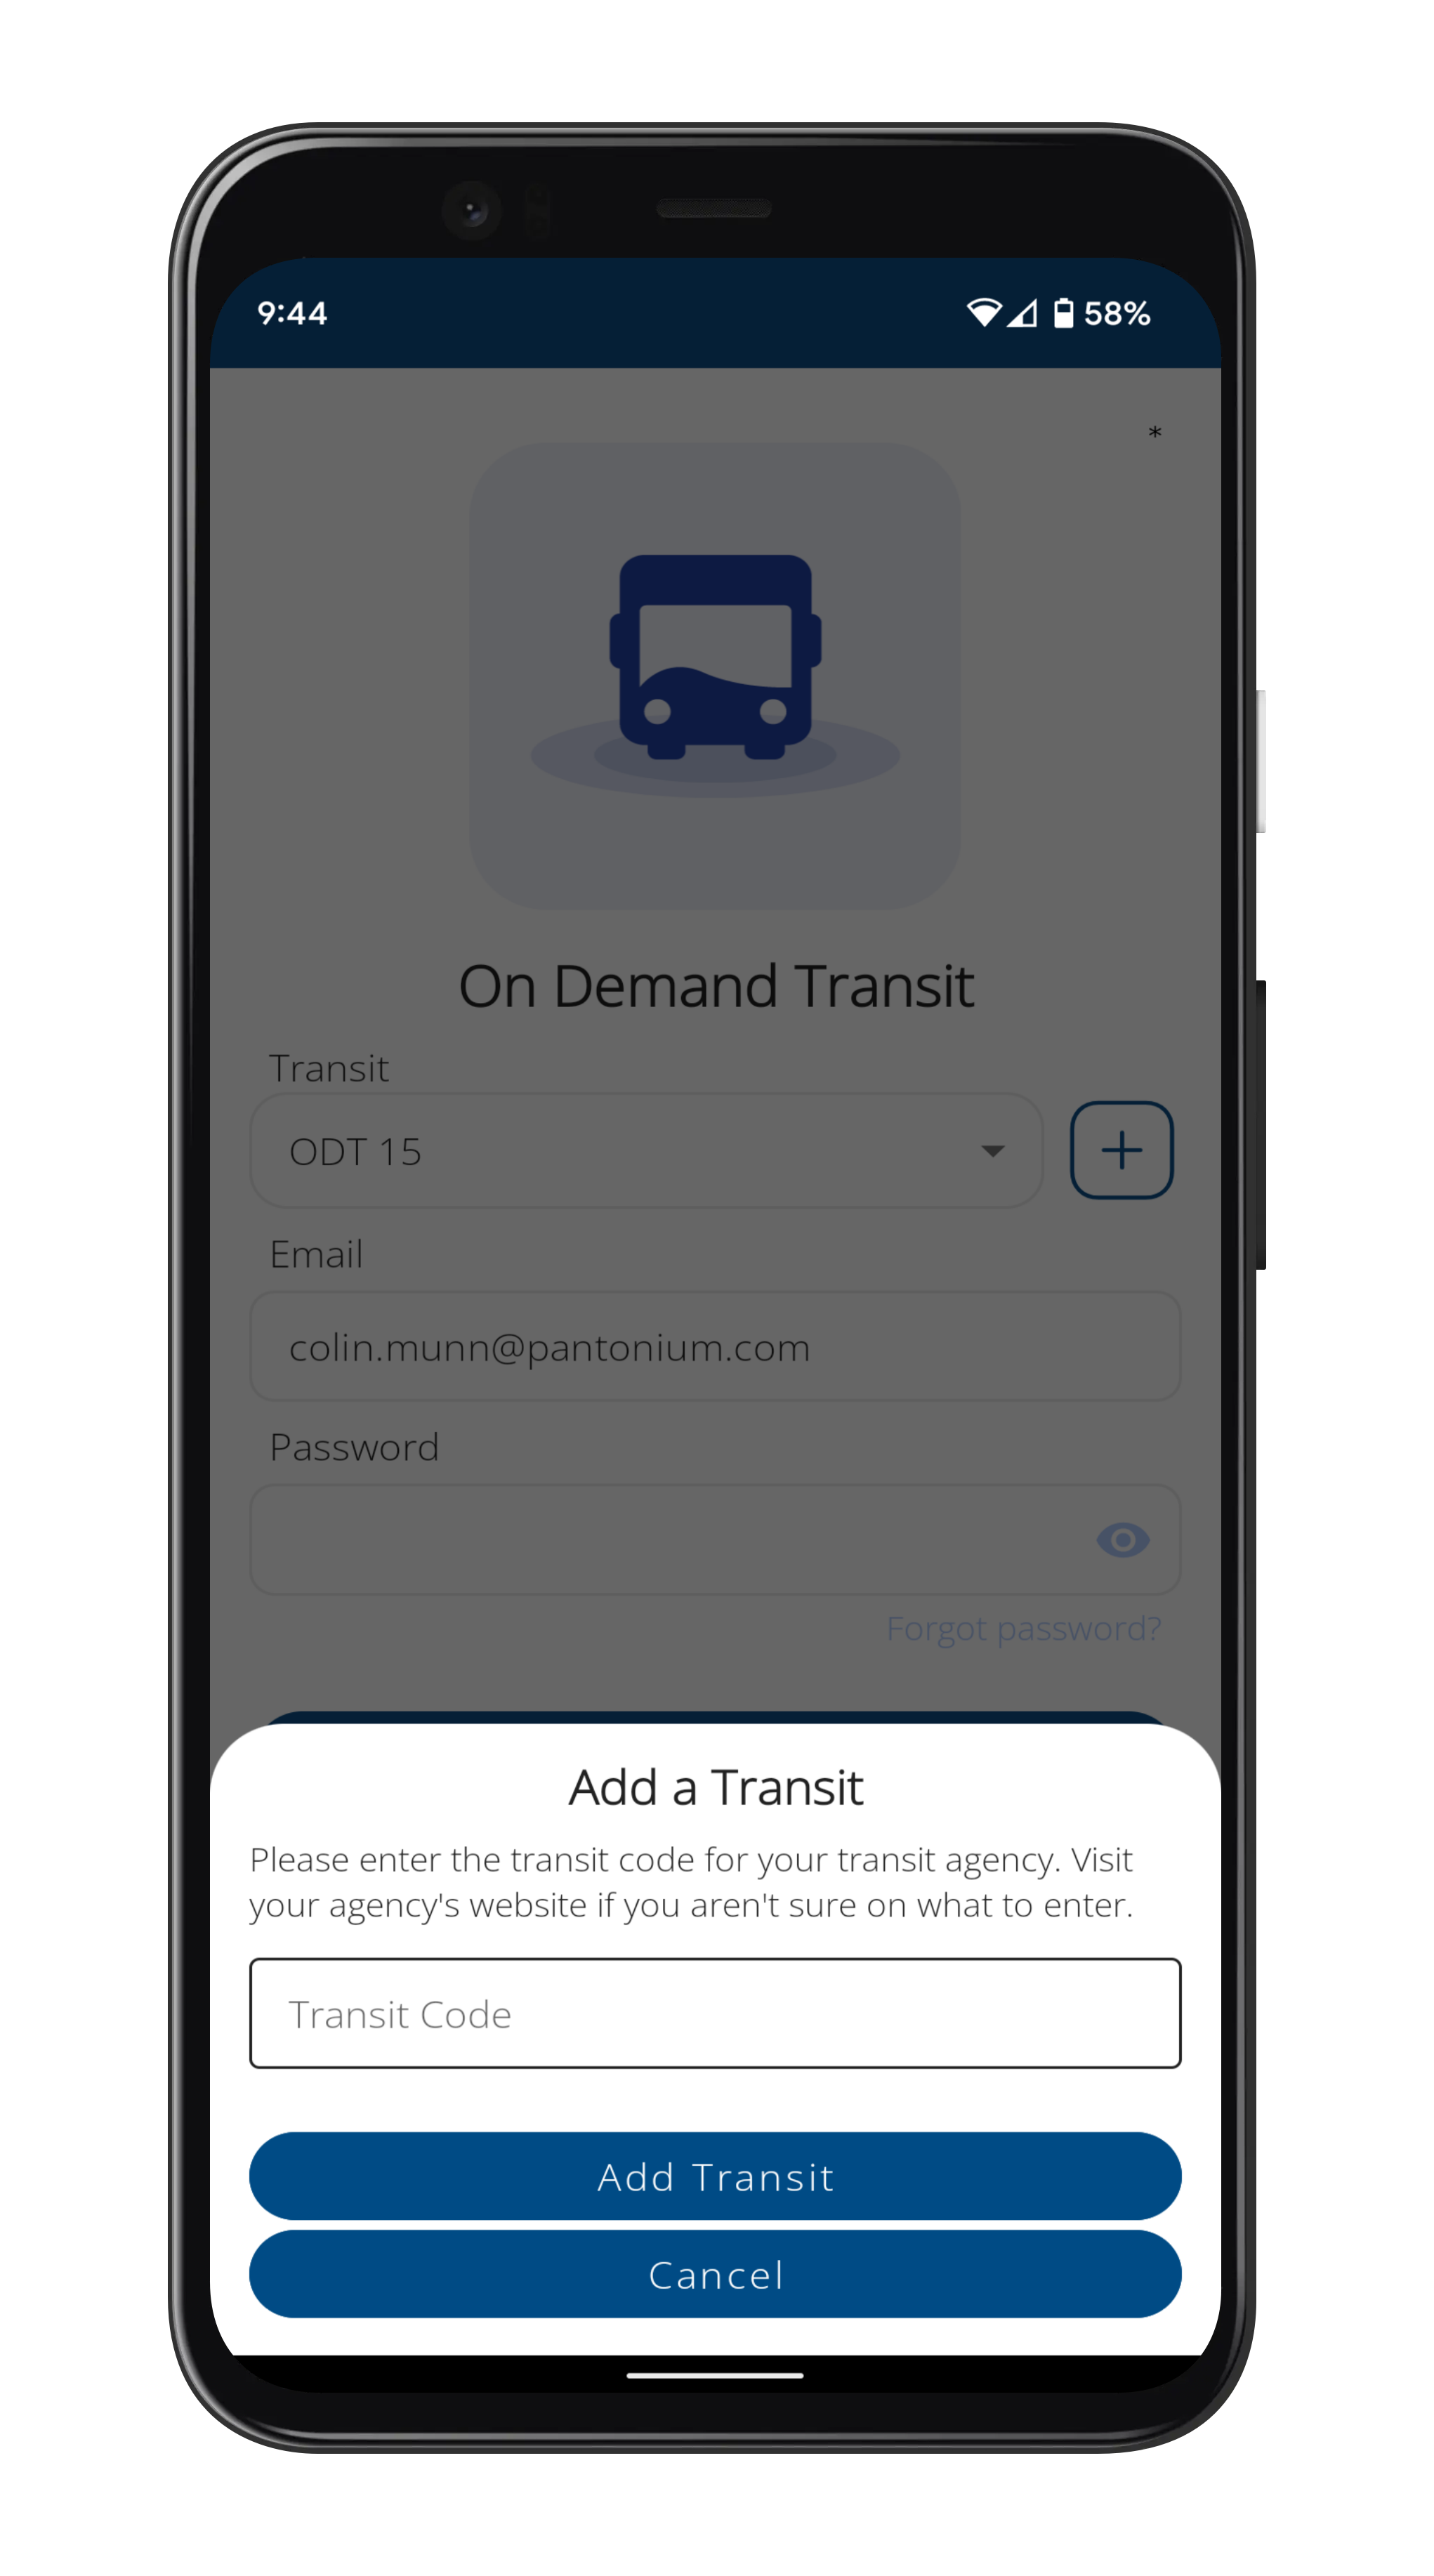 Image of transit code field on mobile app